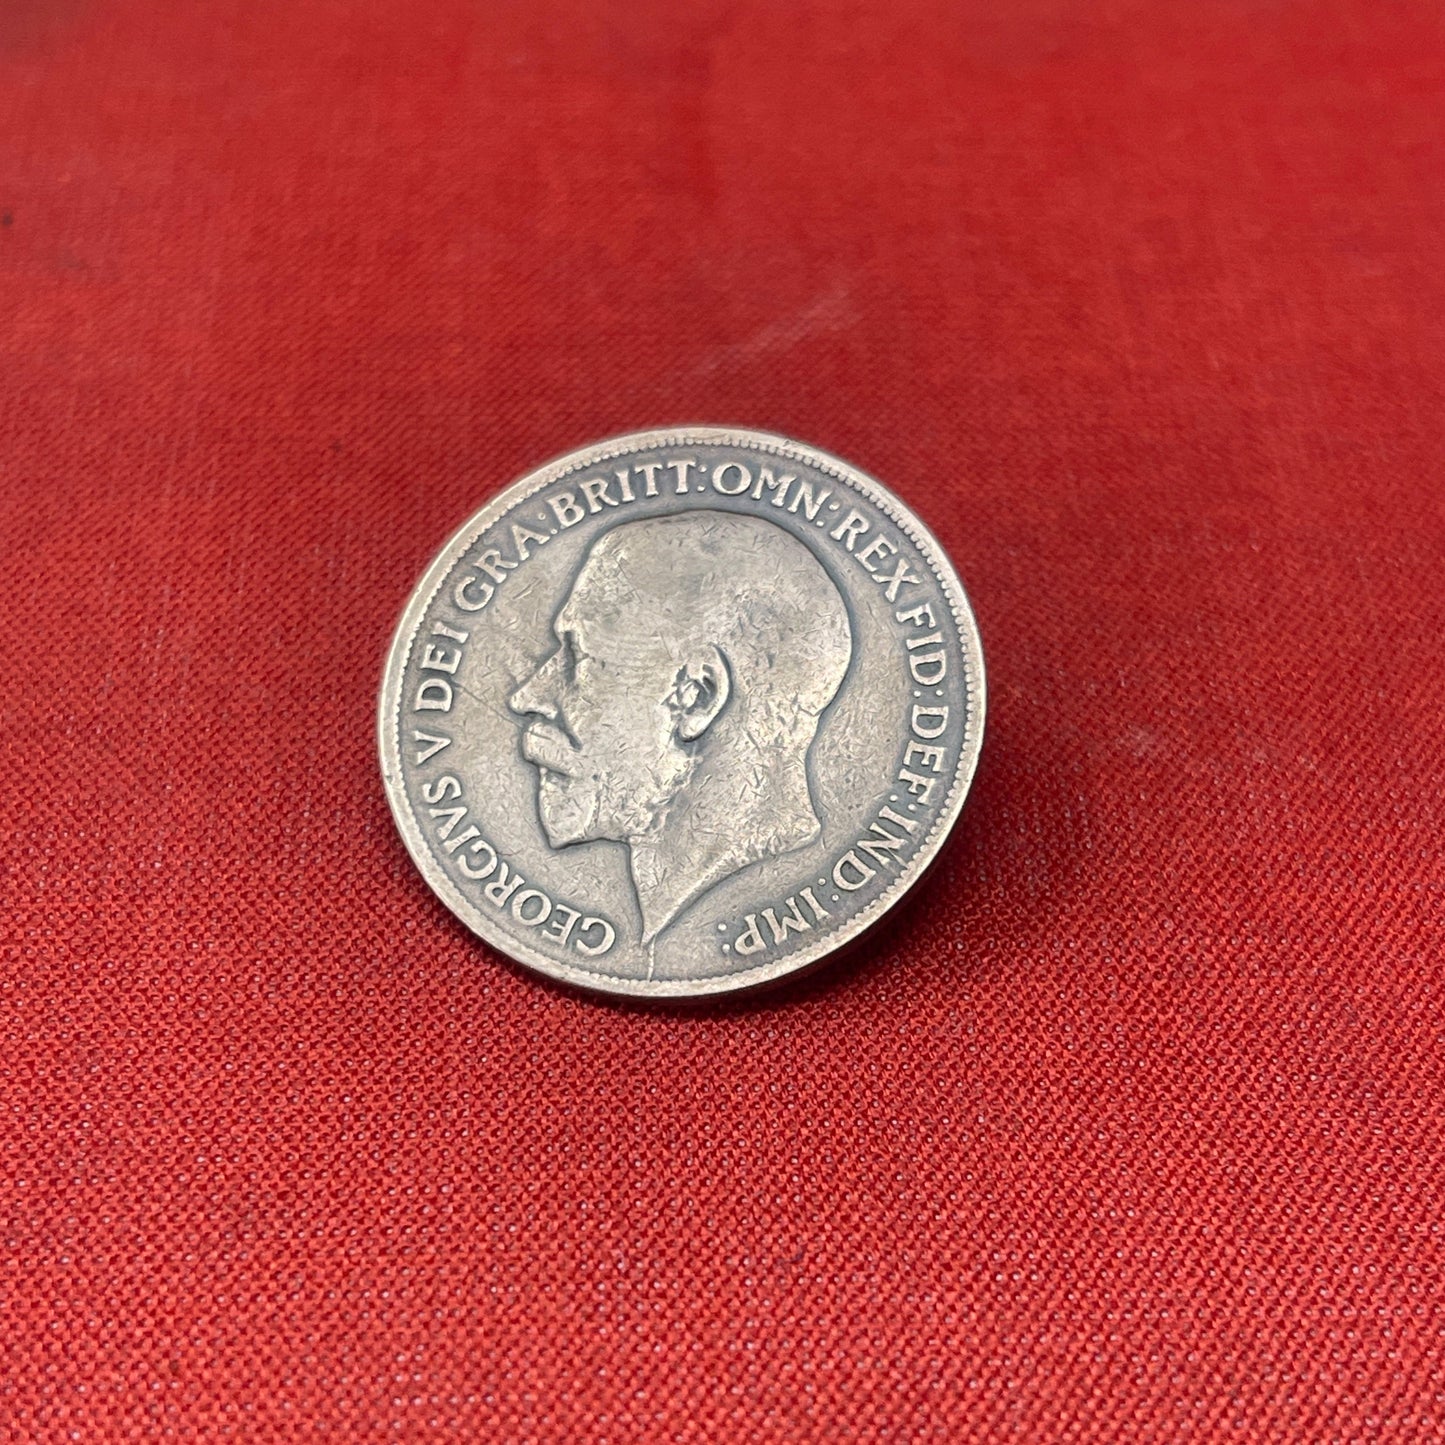 Explore the history and collectability of the King George V One Penny dated 1936. Perfect for numismatists and history enthusiasts seeking an authentic piece of British coinage.